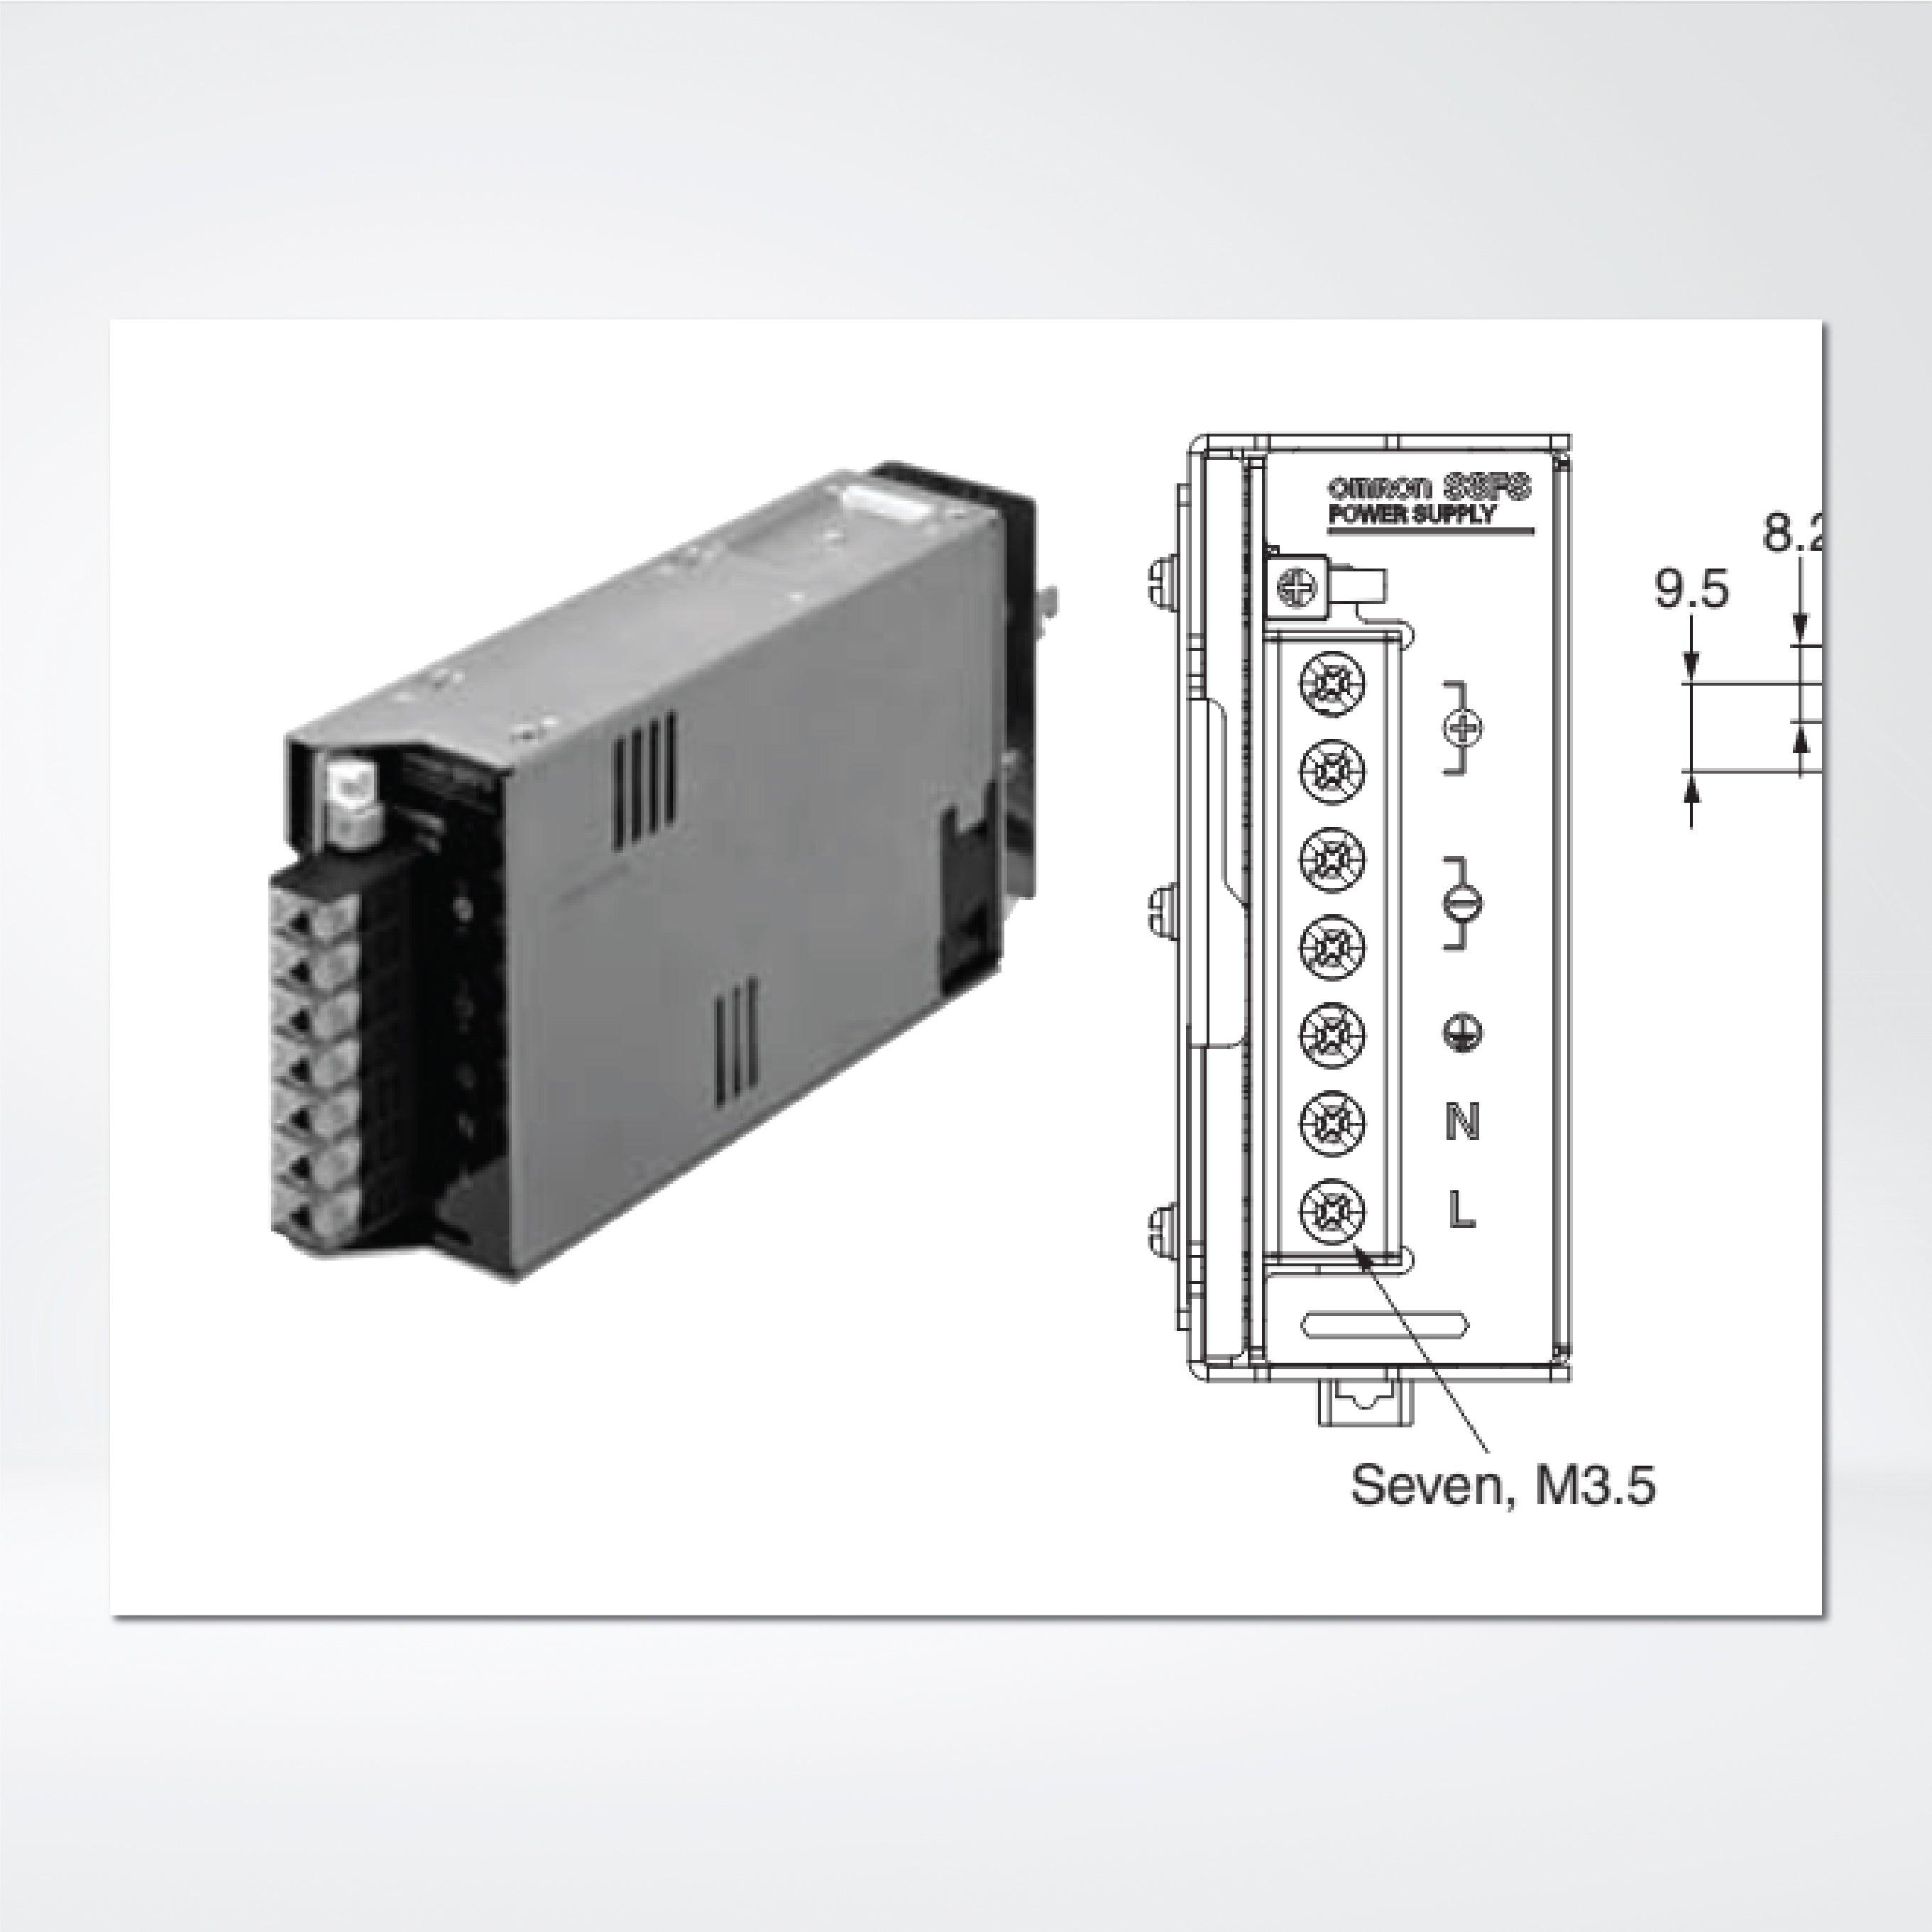 S8FS-G30012CD Switch Mode Power Supply Superior Basic Performance, 300 W, 12 VDC, DIN Rail Mounting - Riverplus